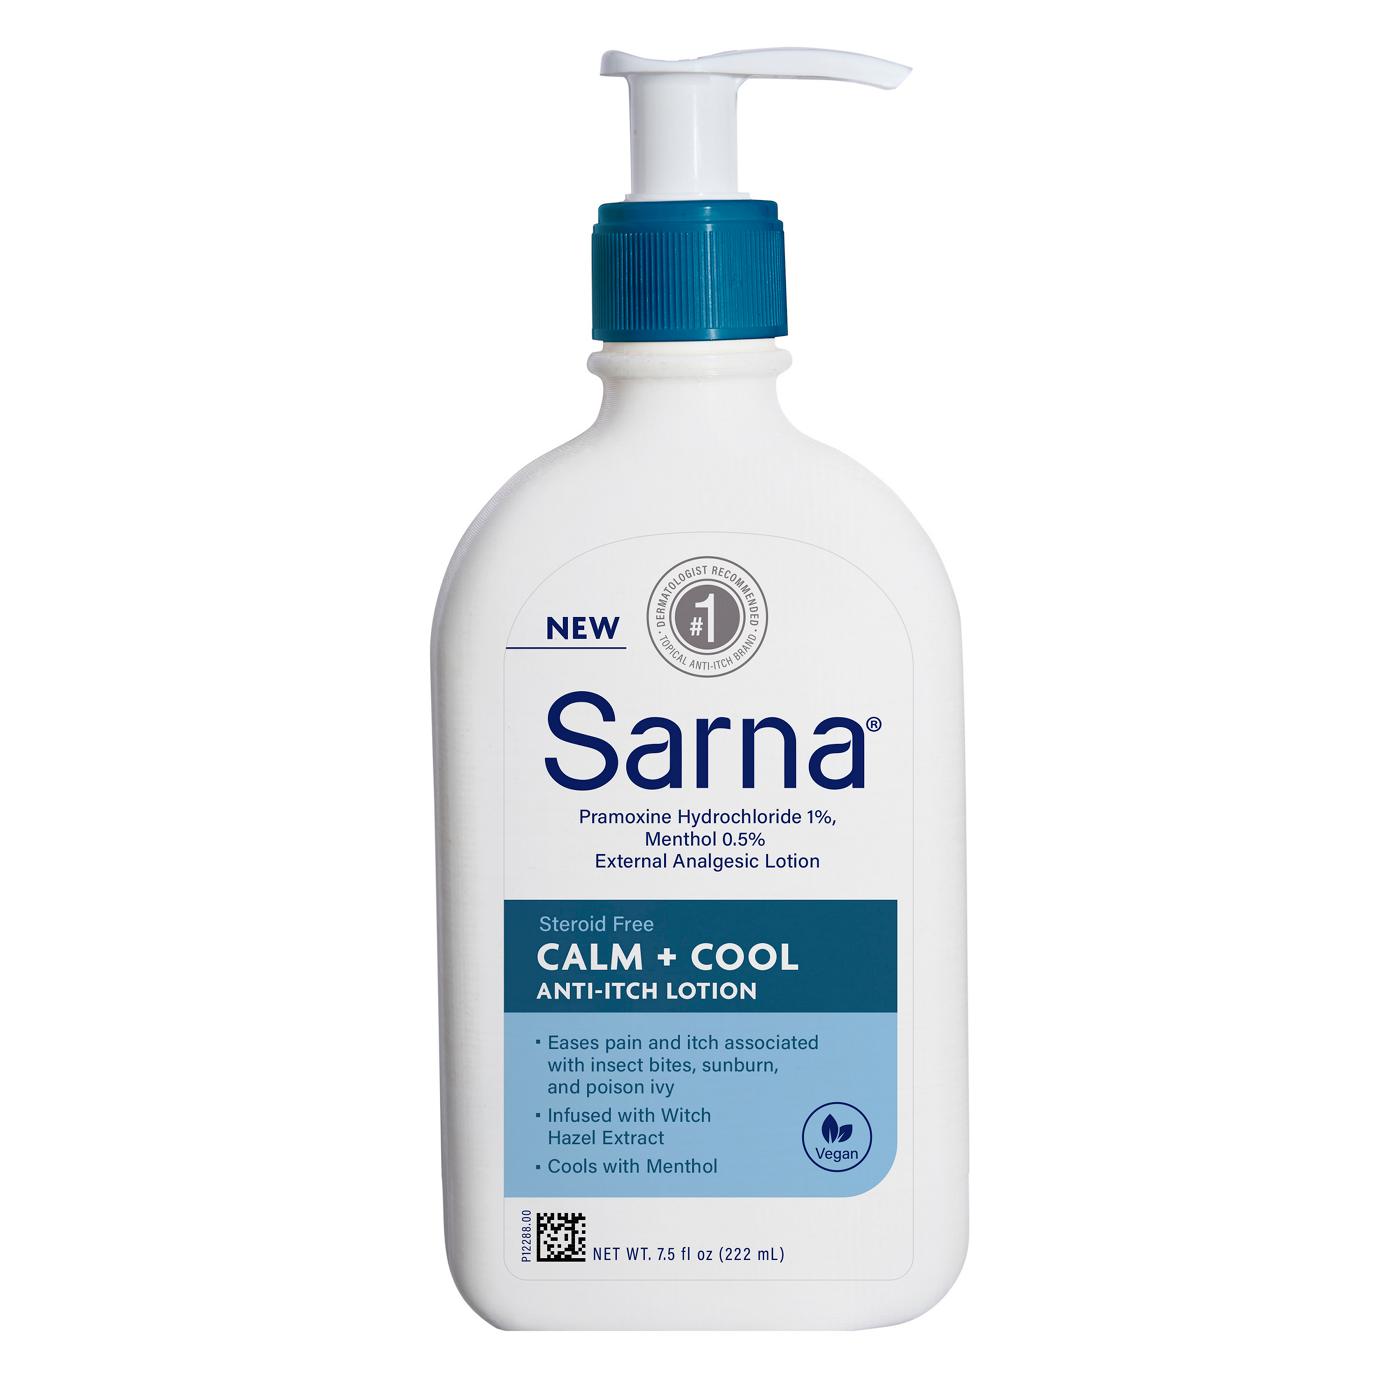 Sarna Calm + Cool Anti-Itch Lotion; image 1 of 2